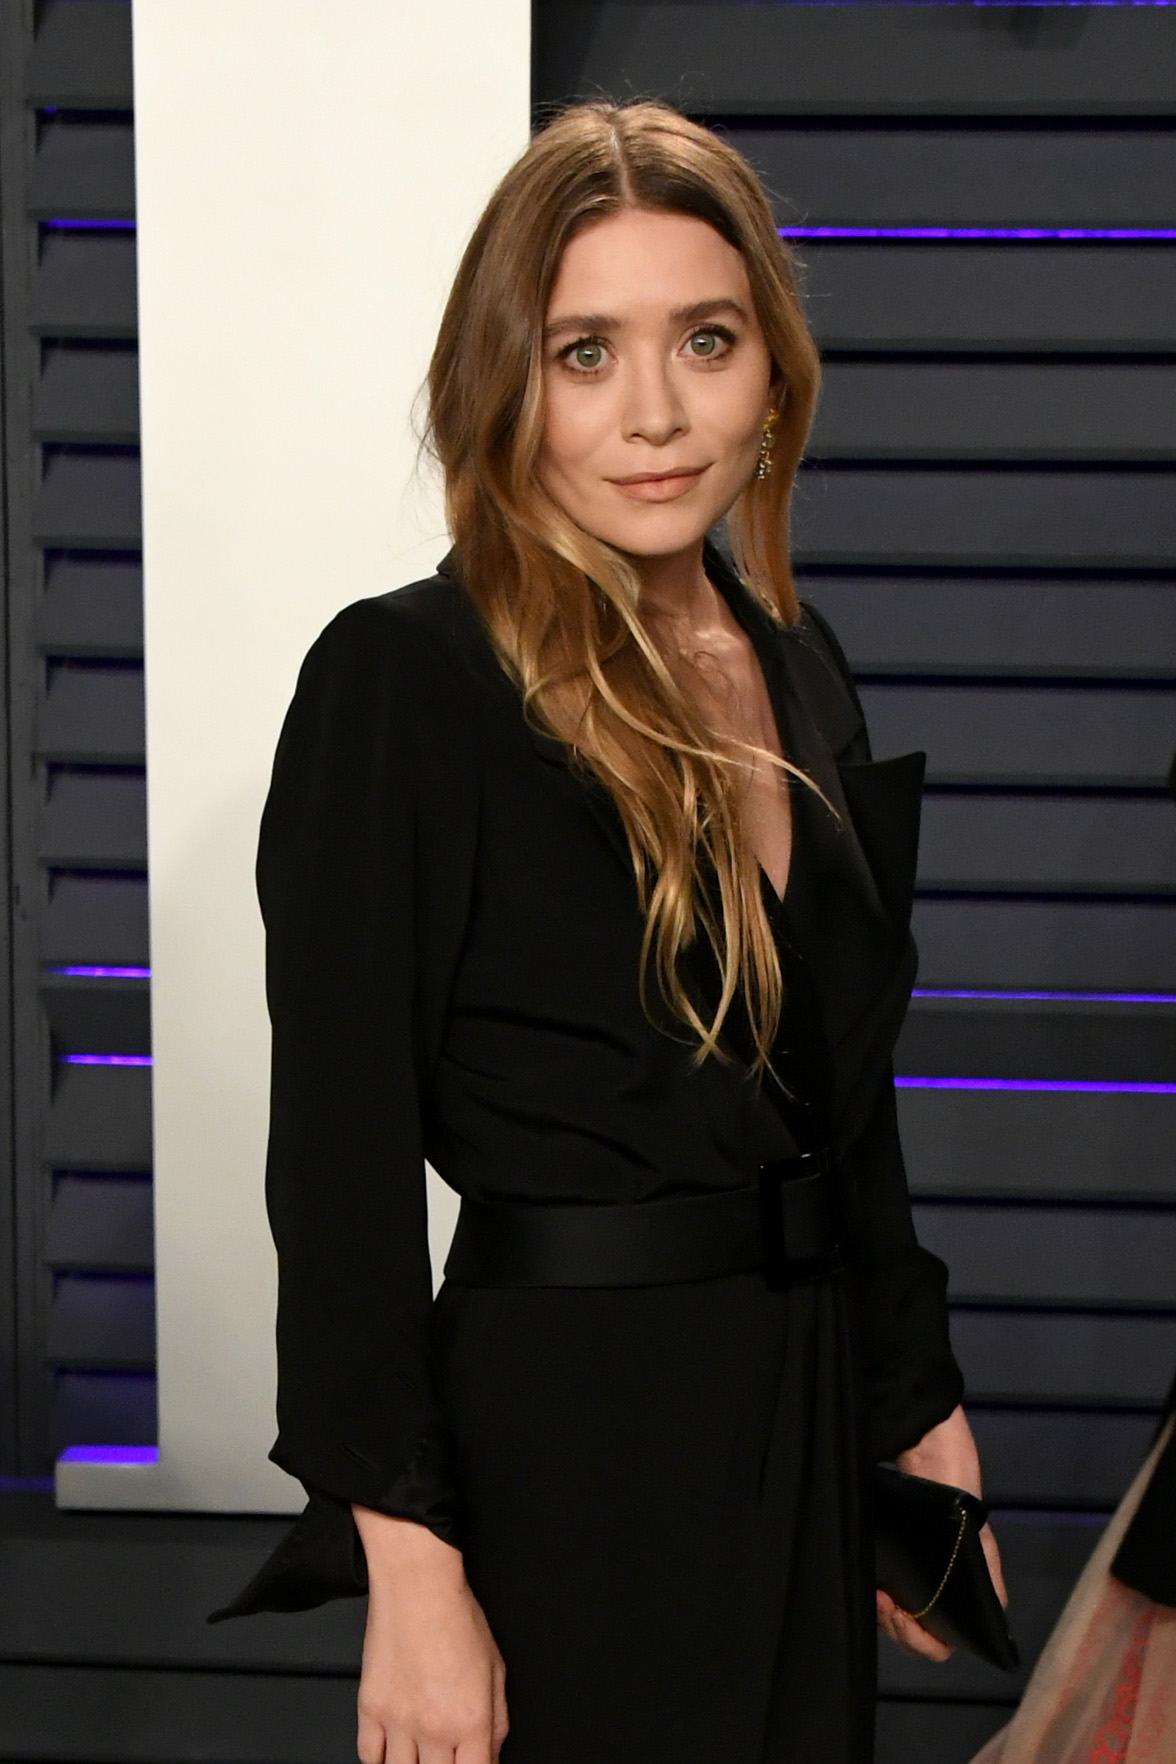 Ashley Olsen at the 2019 Vanity Fair Oscar Party on February 24, 2019 in Beverly Hills, California | Source: Getty Images